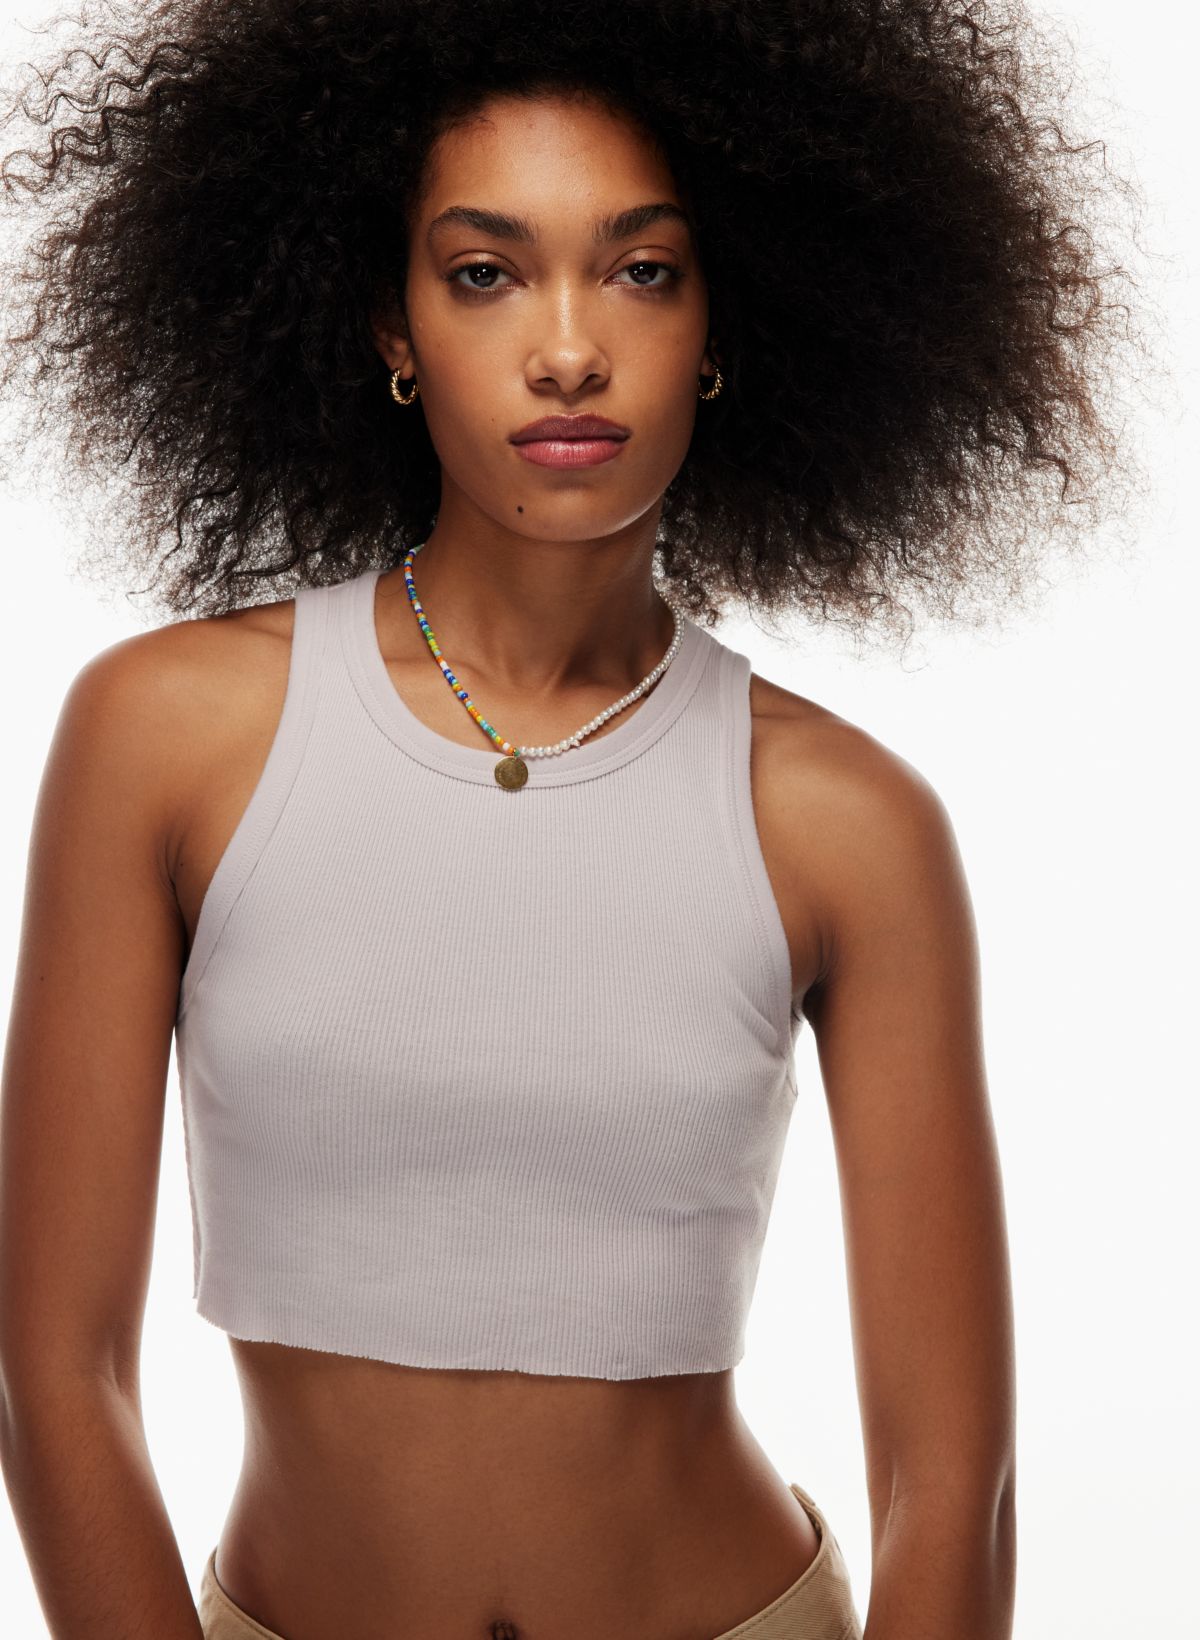 Where To Buy Cropped Tank Tops?